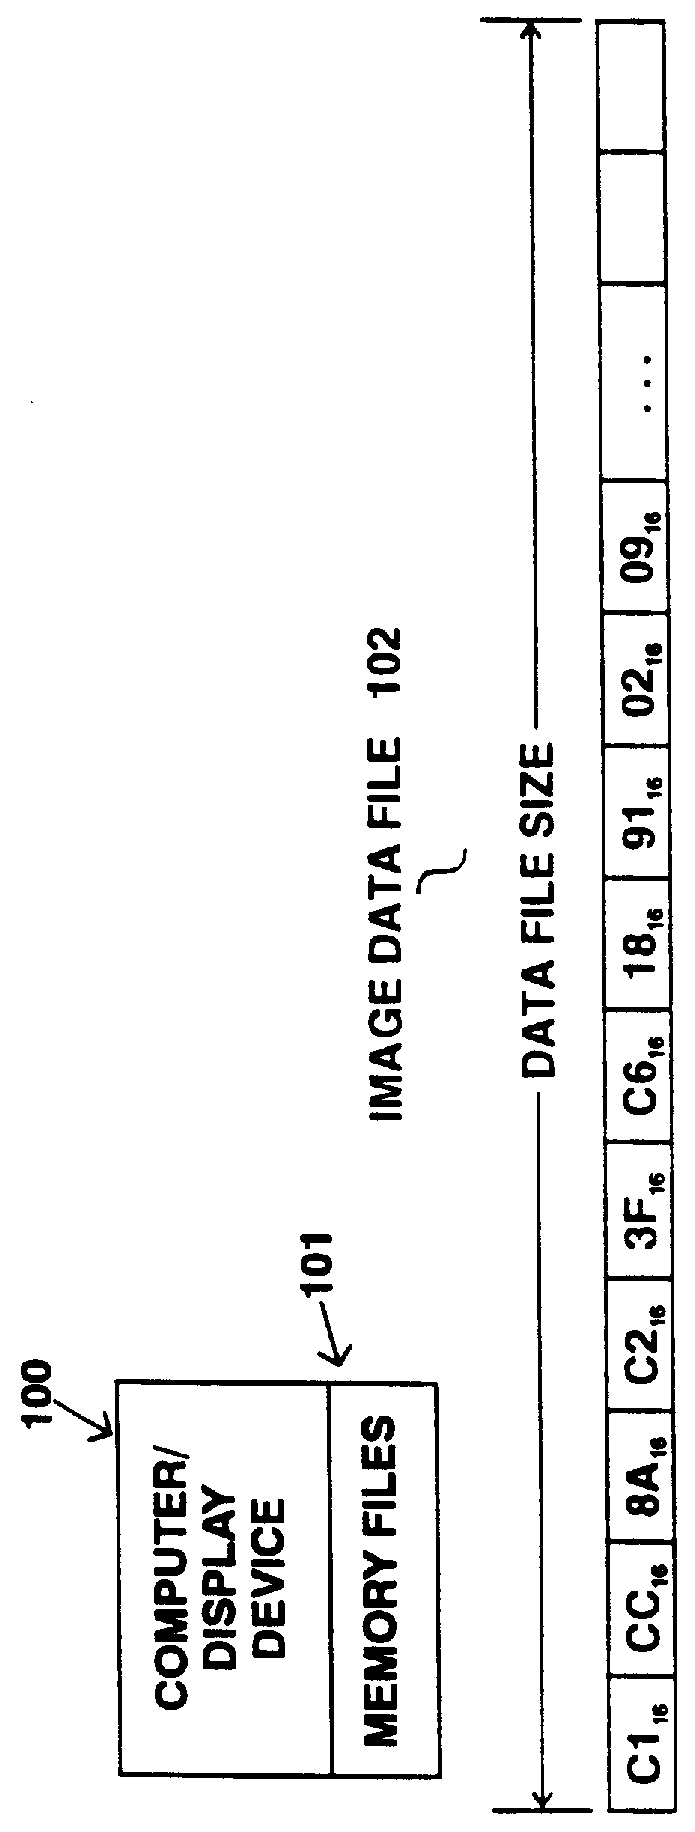 System and method to display raster images with negligible delay time and reduced memory requirements